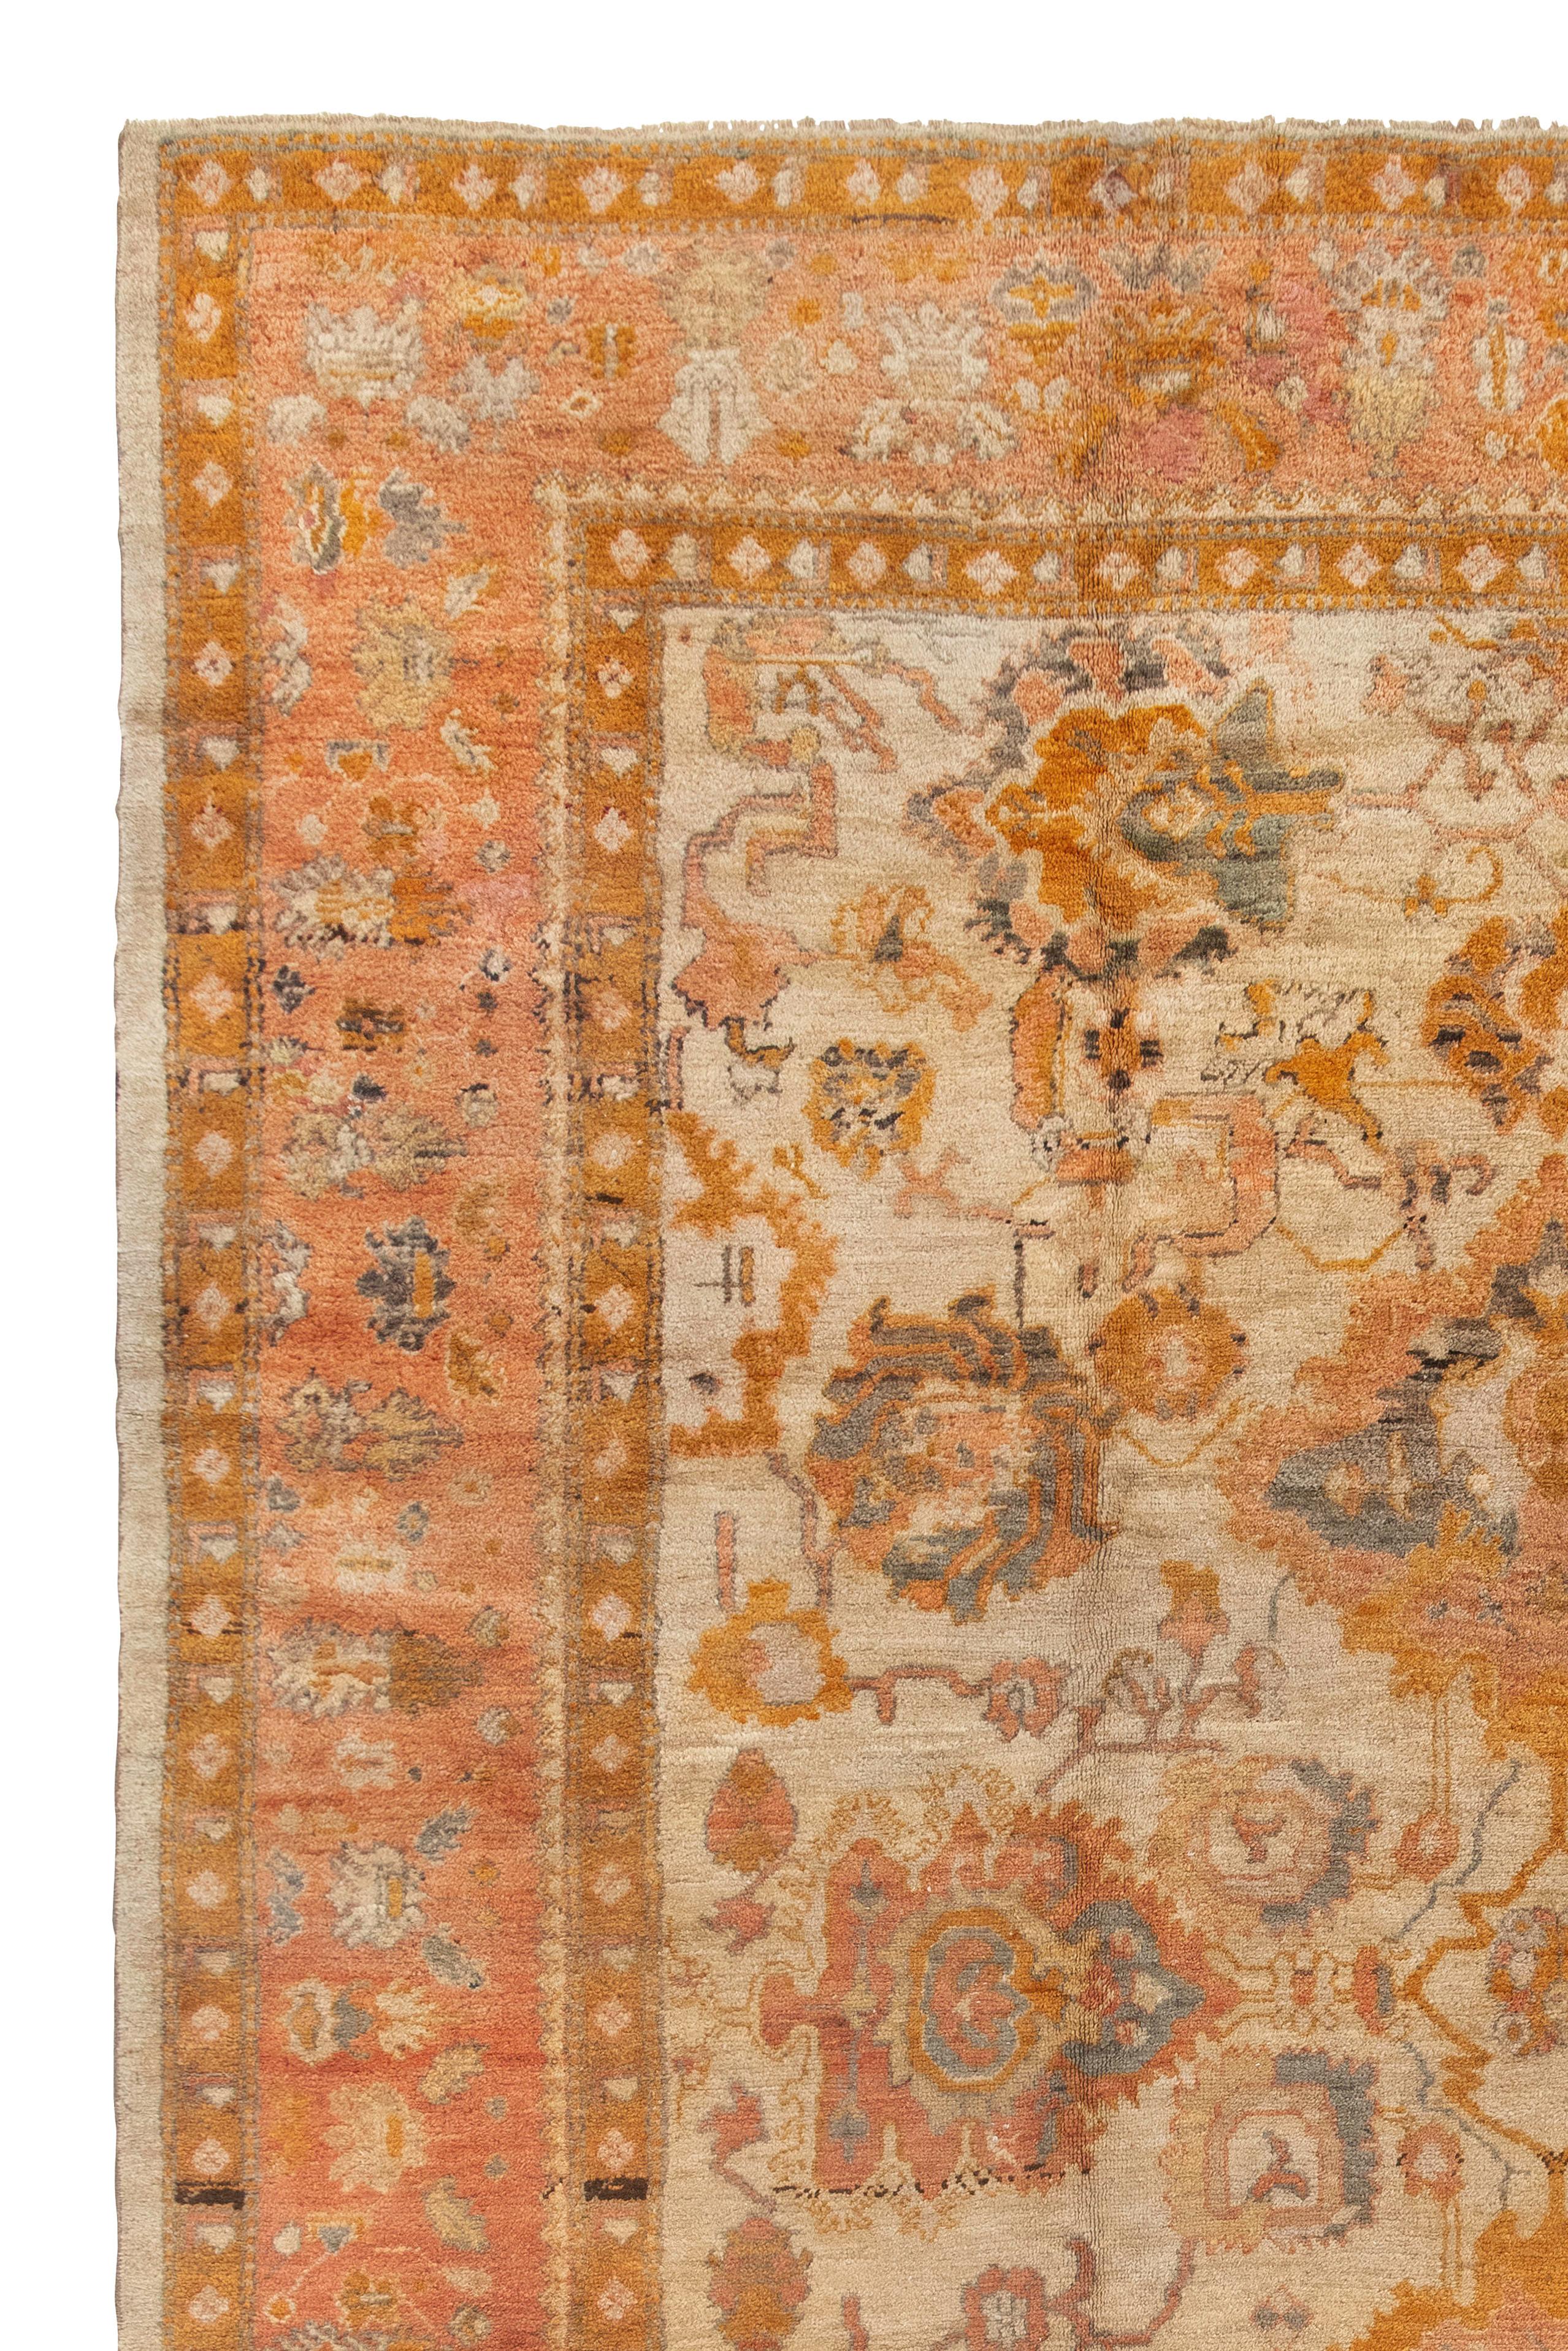 Late 19th Century Turkish Oushak Rug Antique, c. 1870s For Sale